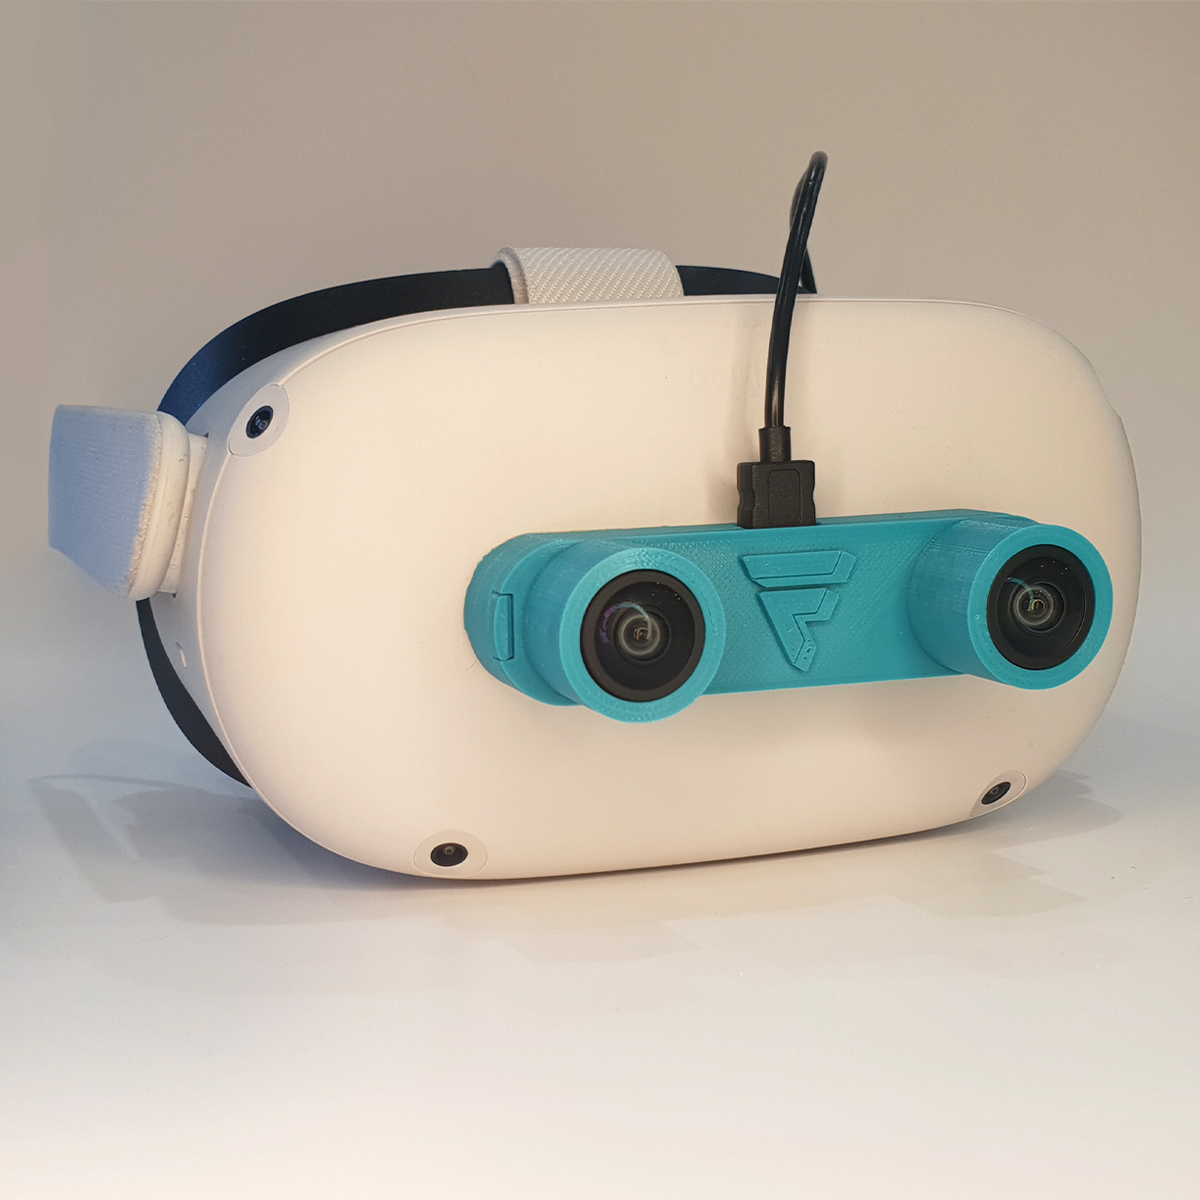 The Foxus camera, in bright blue, mounted on the front of a Meta Quest 2 headset.